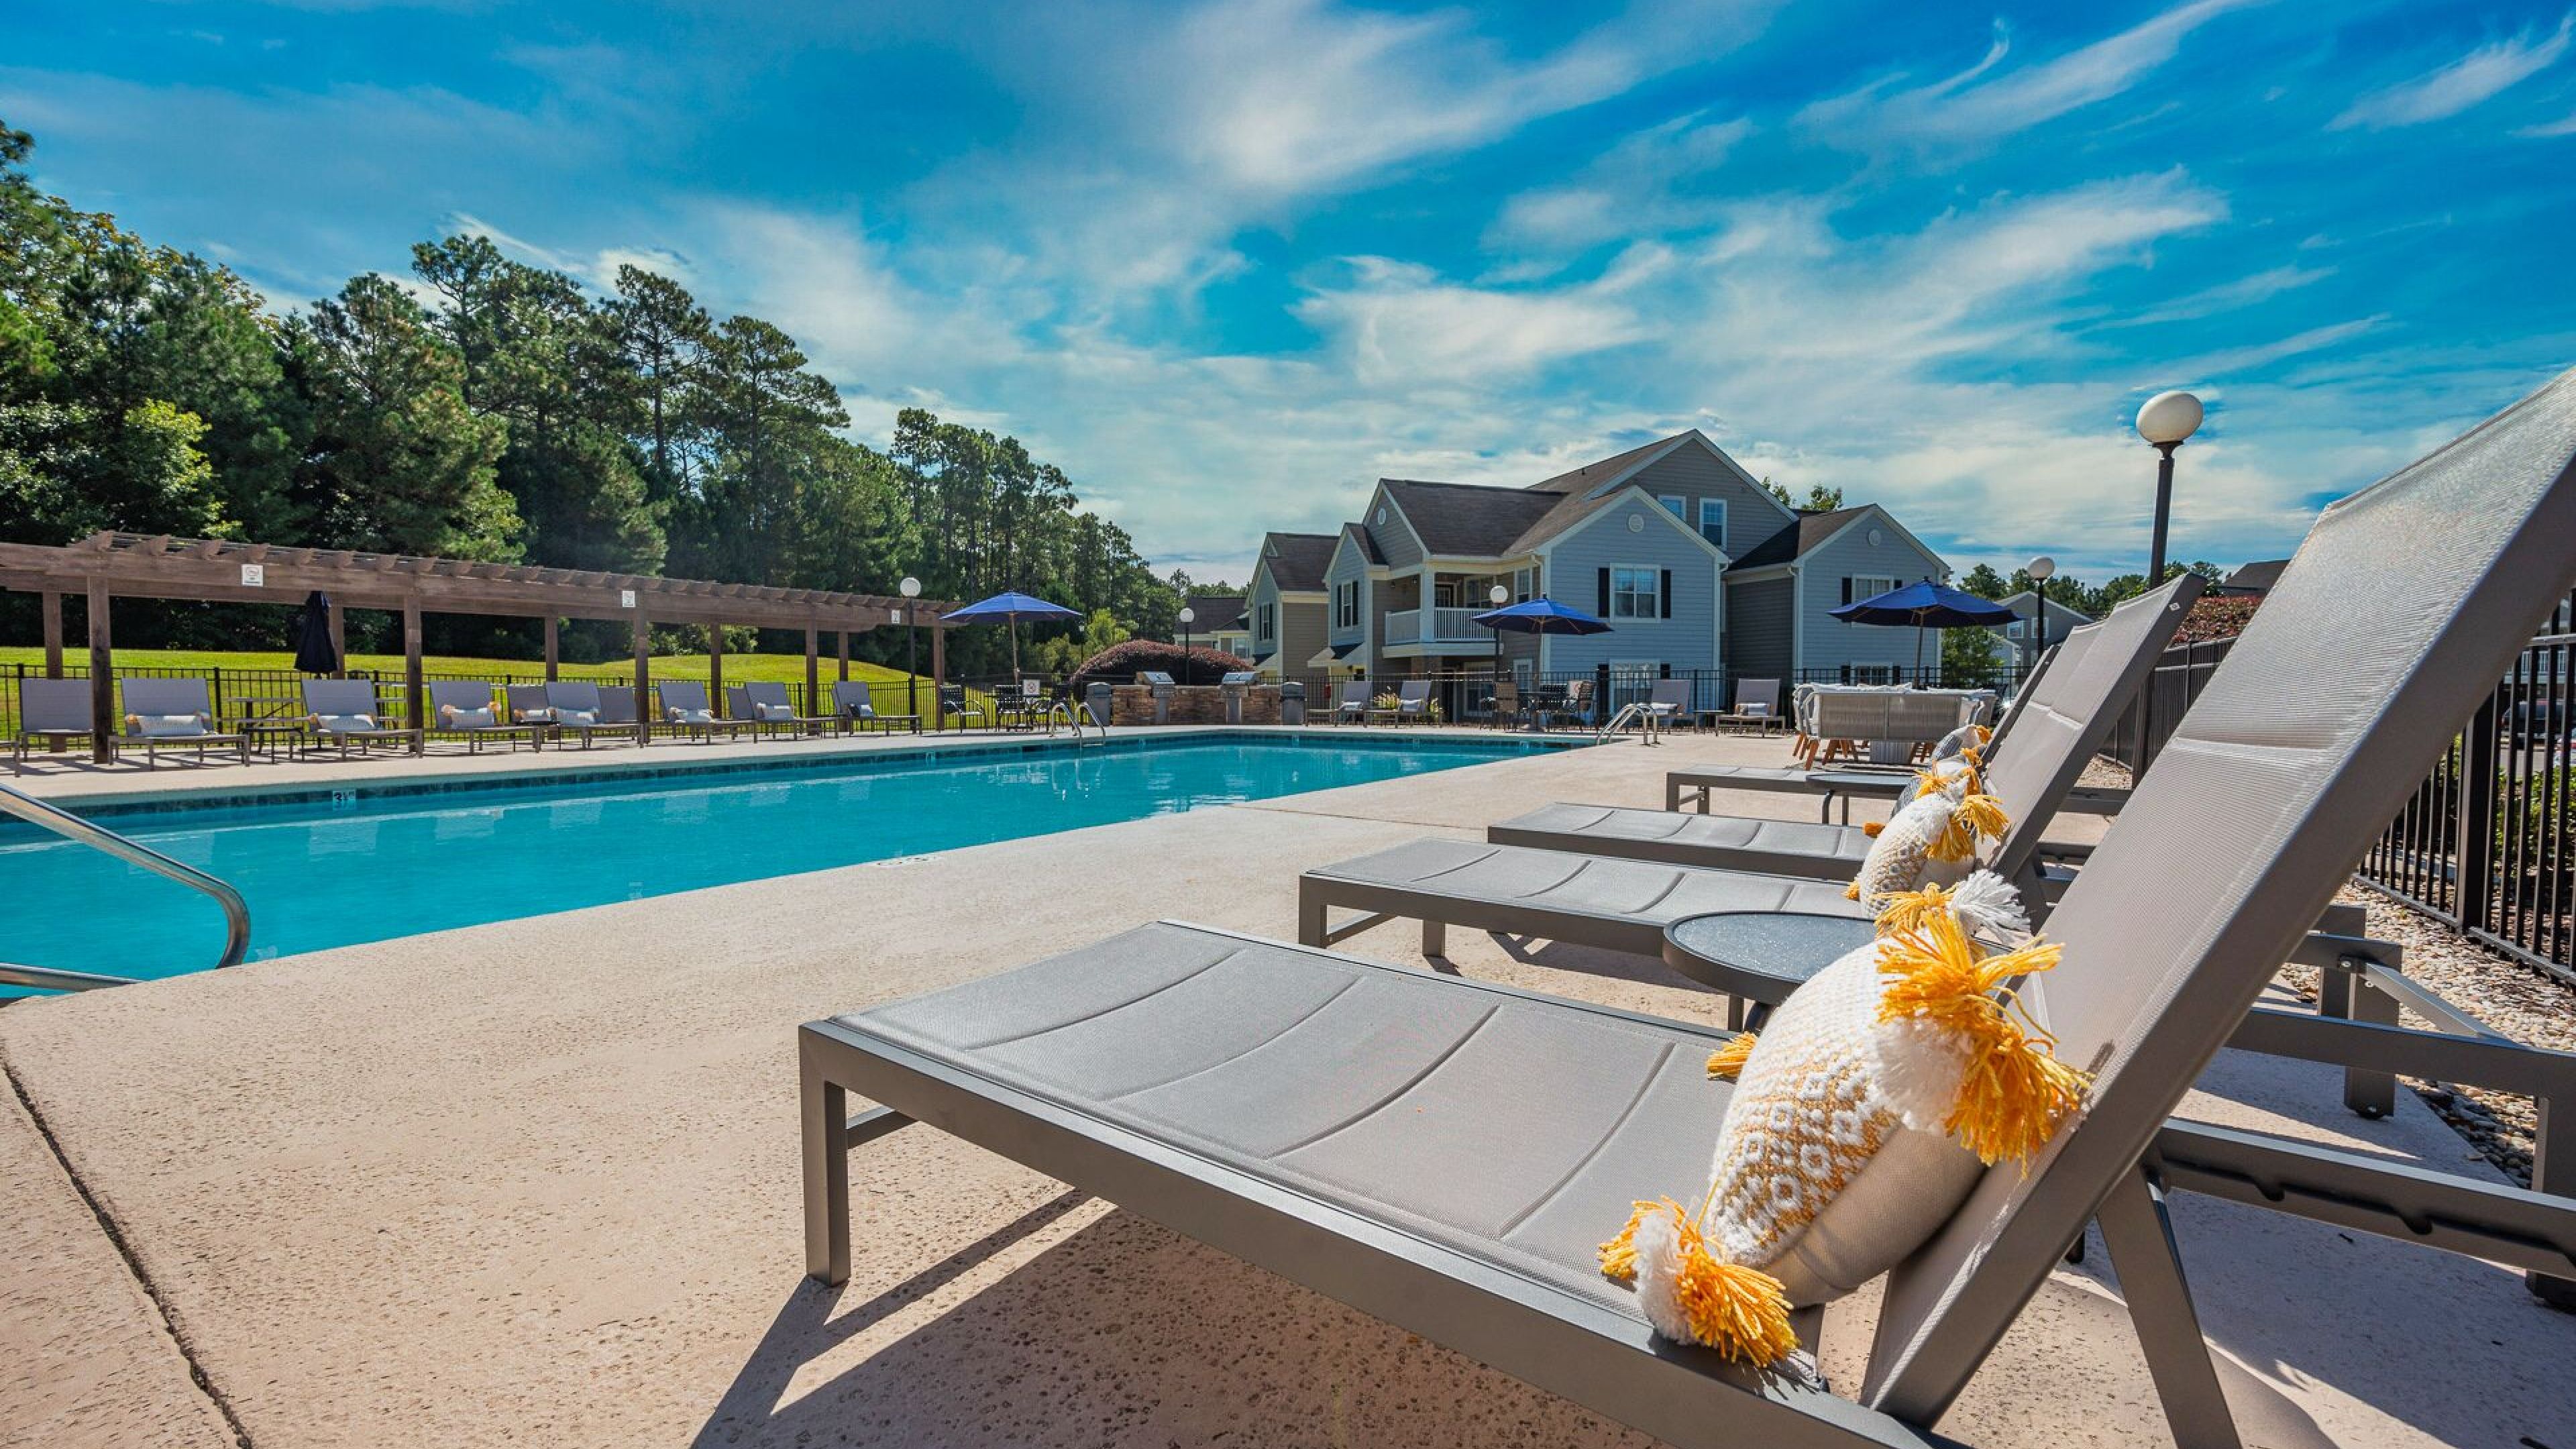 Hawthorne at the Pines poolside lounging area with comfortable sunbeds and umbrellas, overlooking a calm residential community